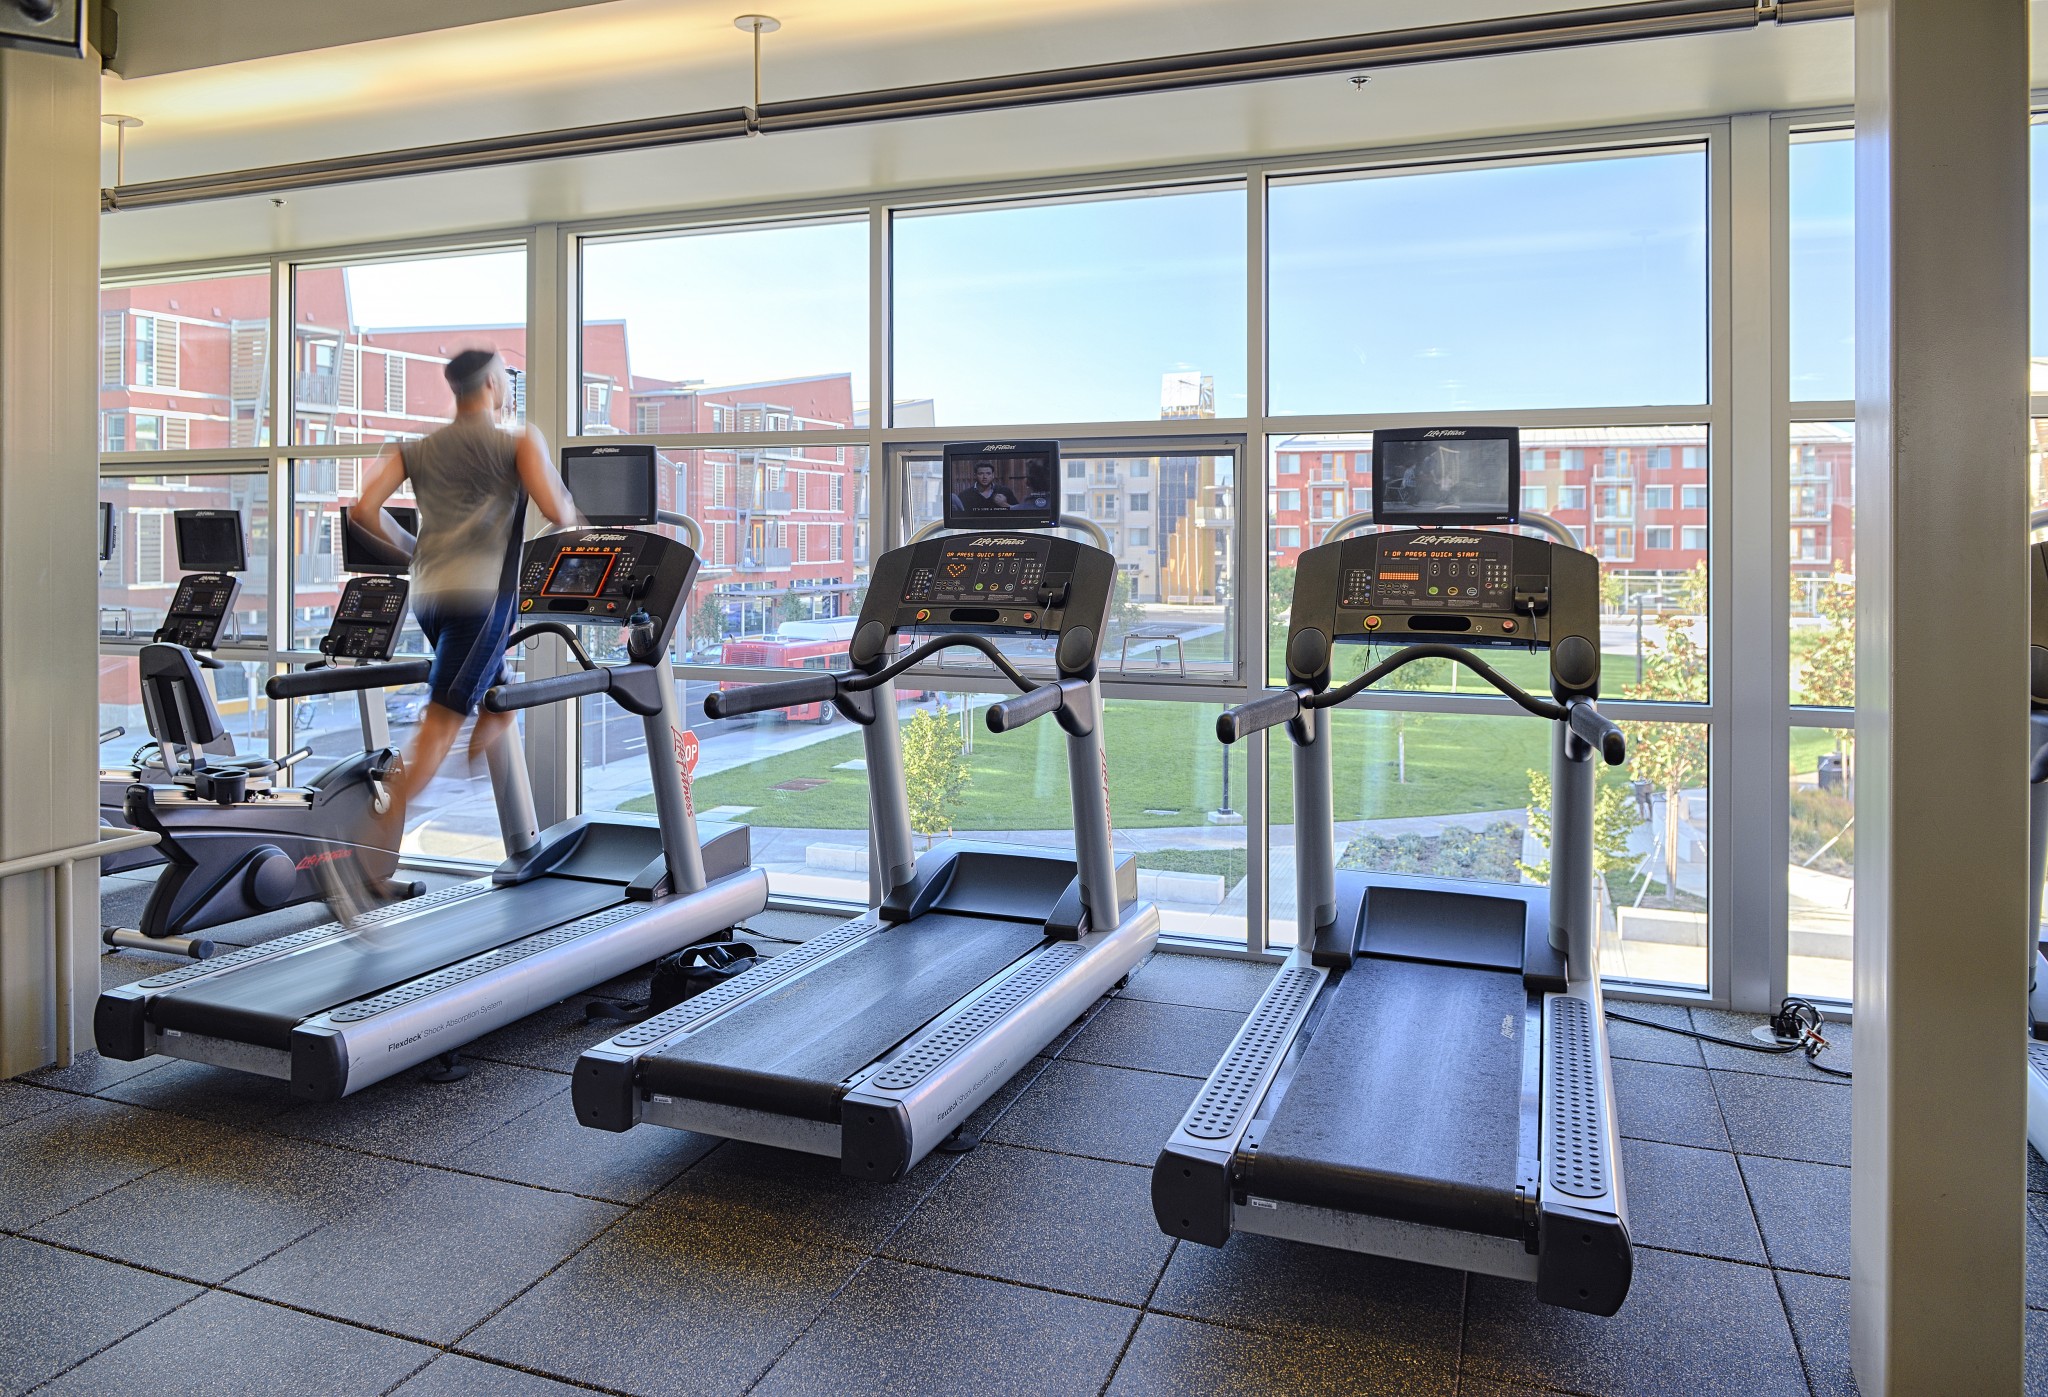 Treadmills in front of large windows with views of other apartment buildings across the way.